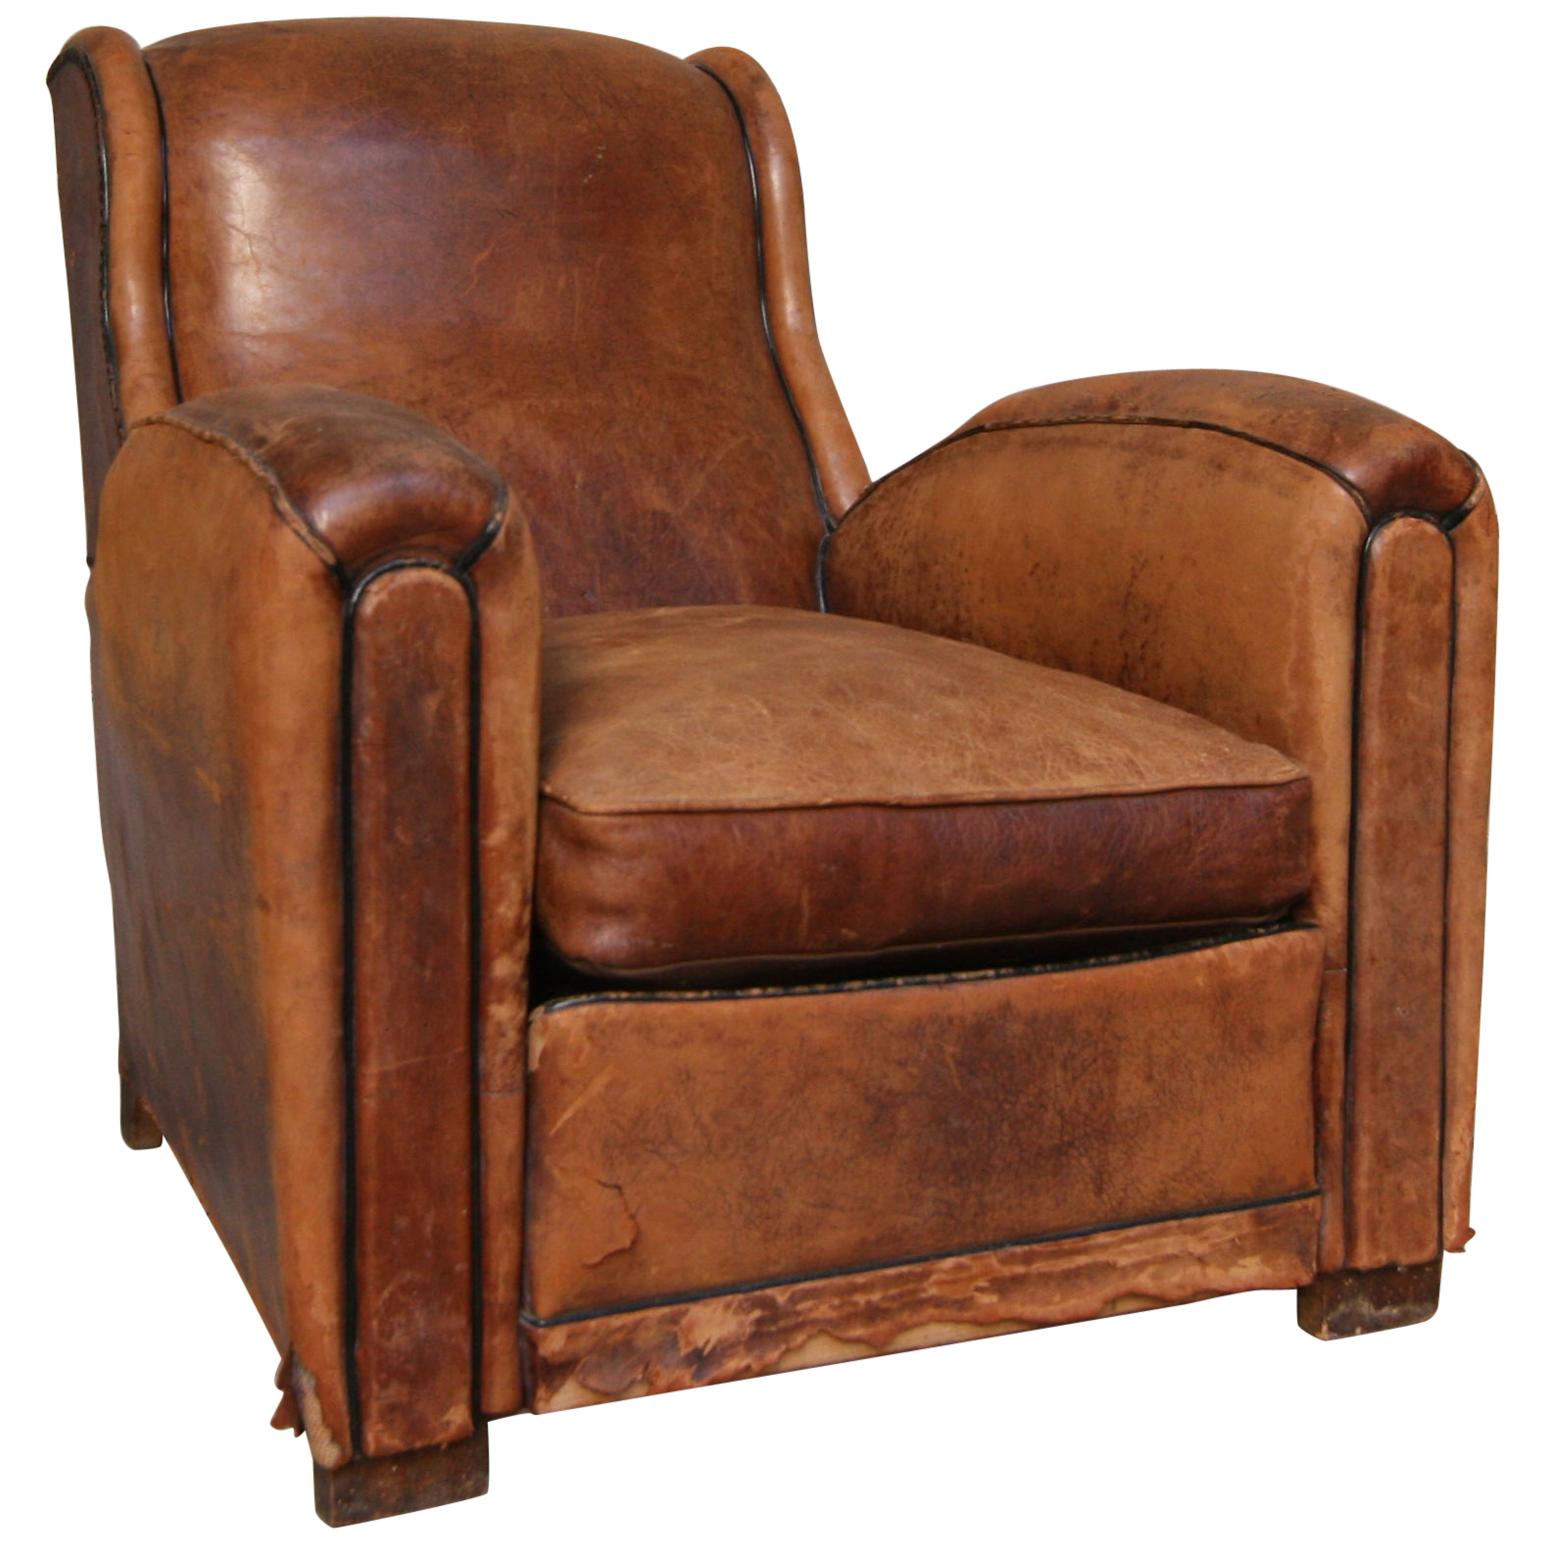 French 1920s Art Deco Brown Leather Armchair. Vintage European Club Chairs